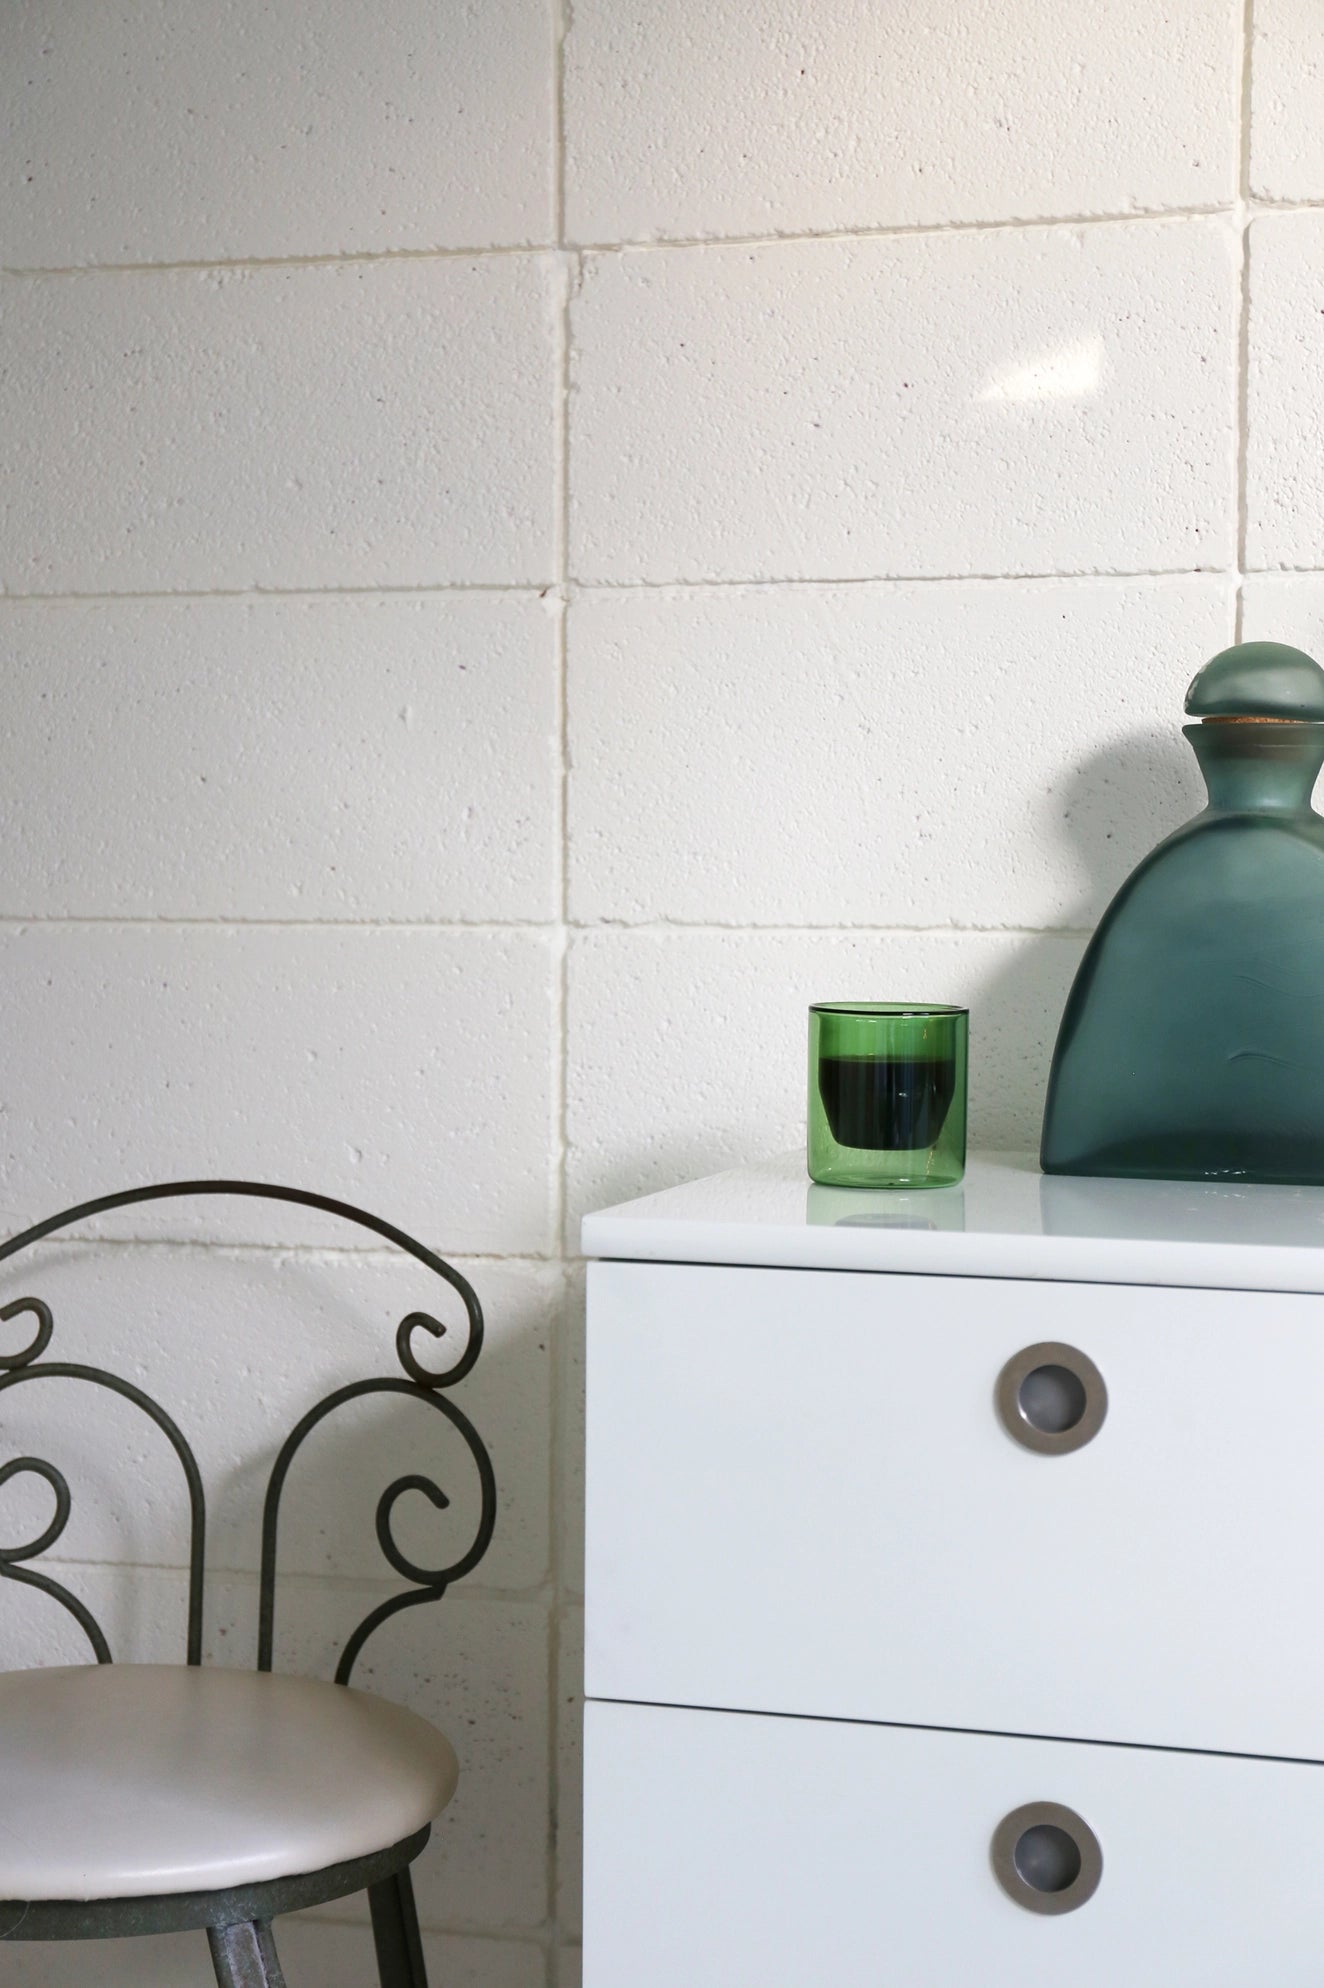 Double-Wall Verde Glass Set